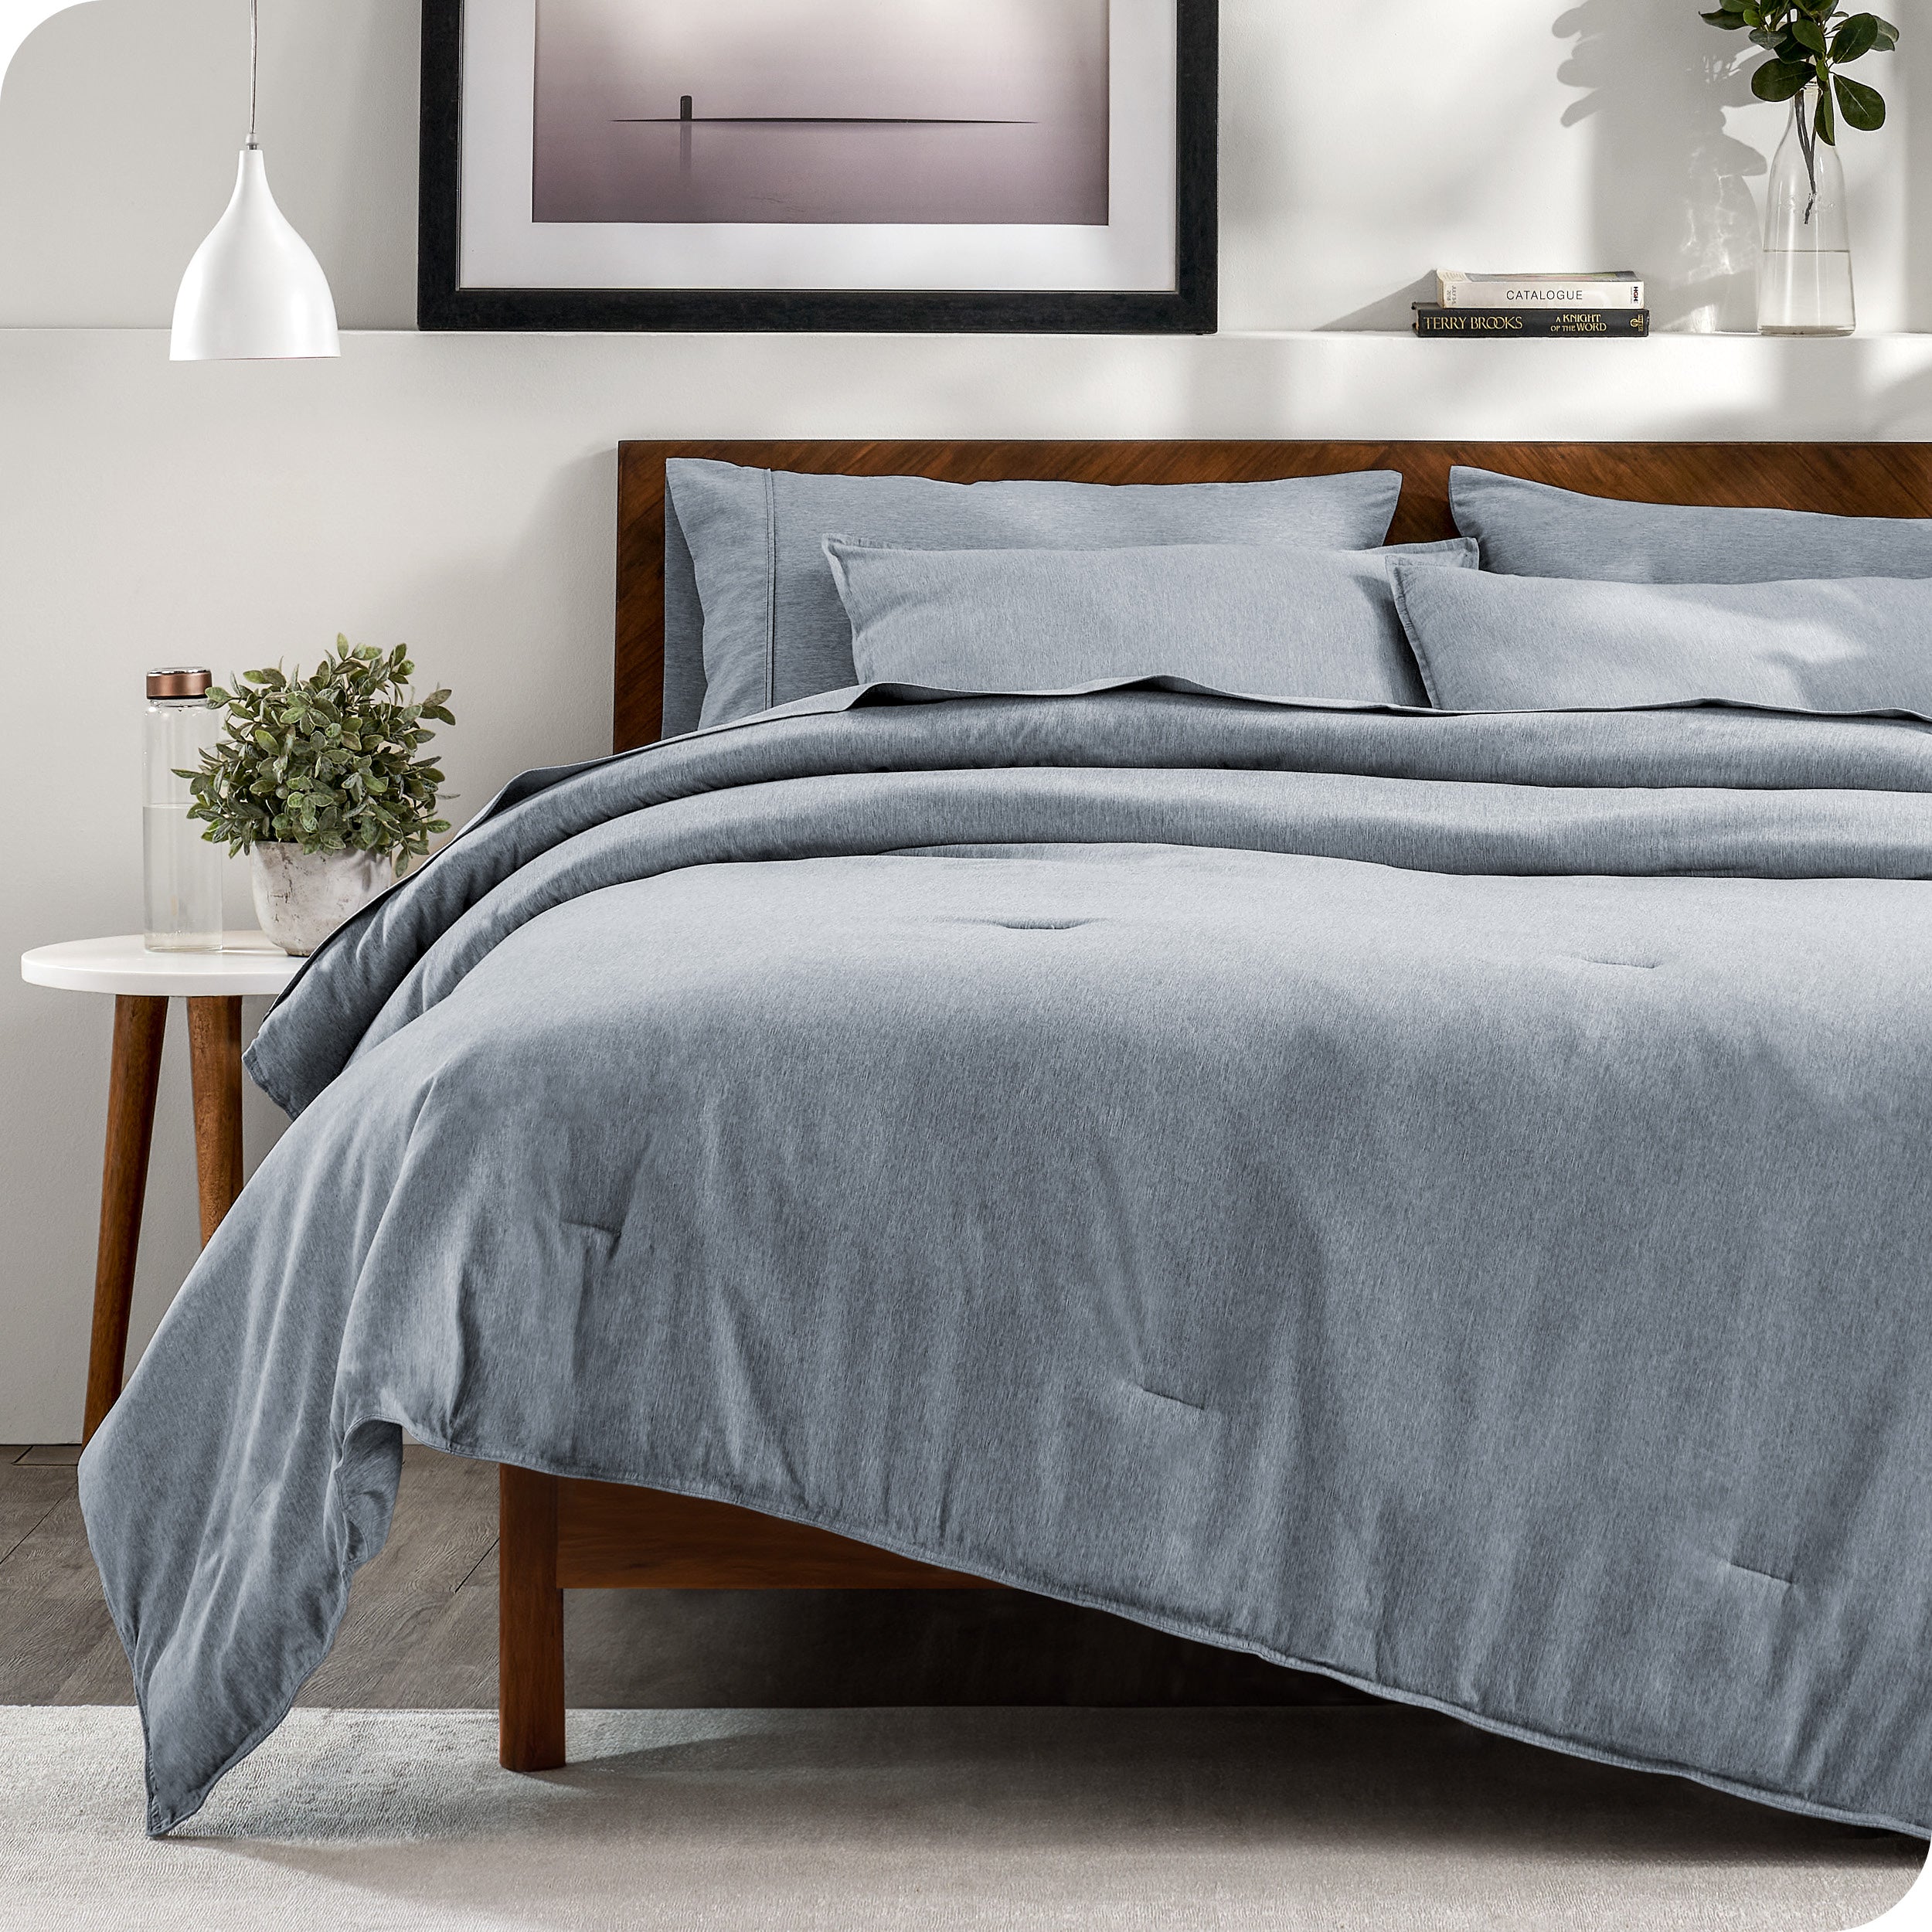 Modern bedroom with a heather grey complete bedding set on the bed